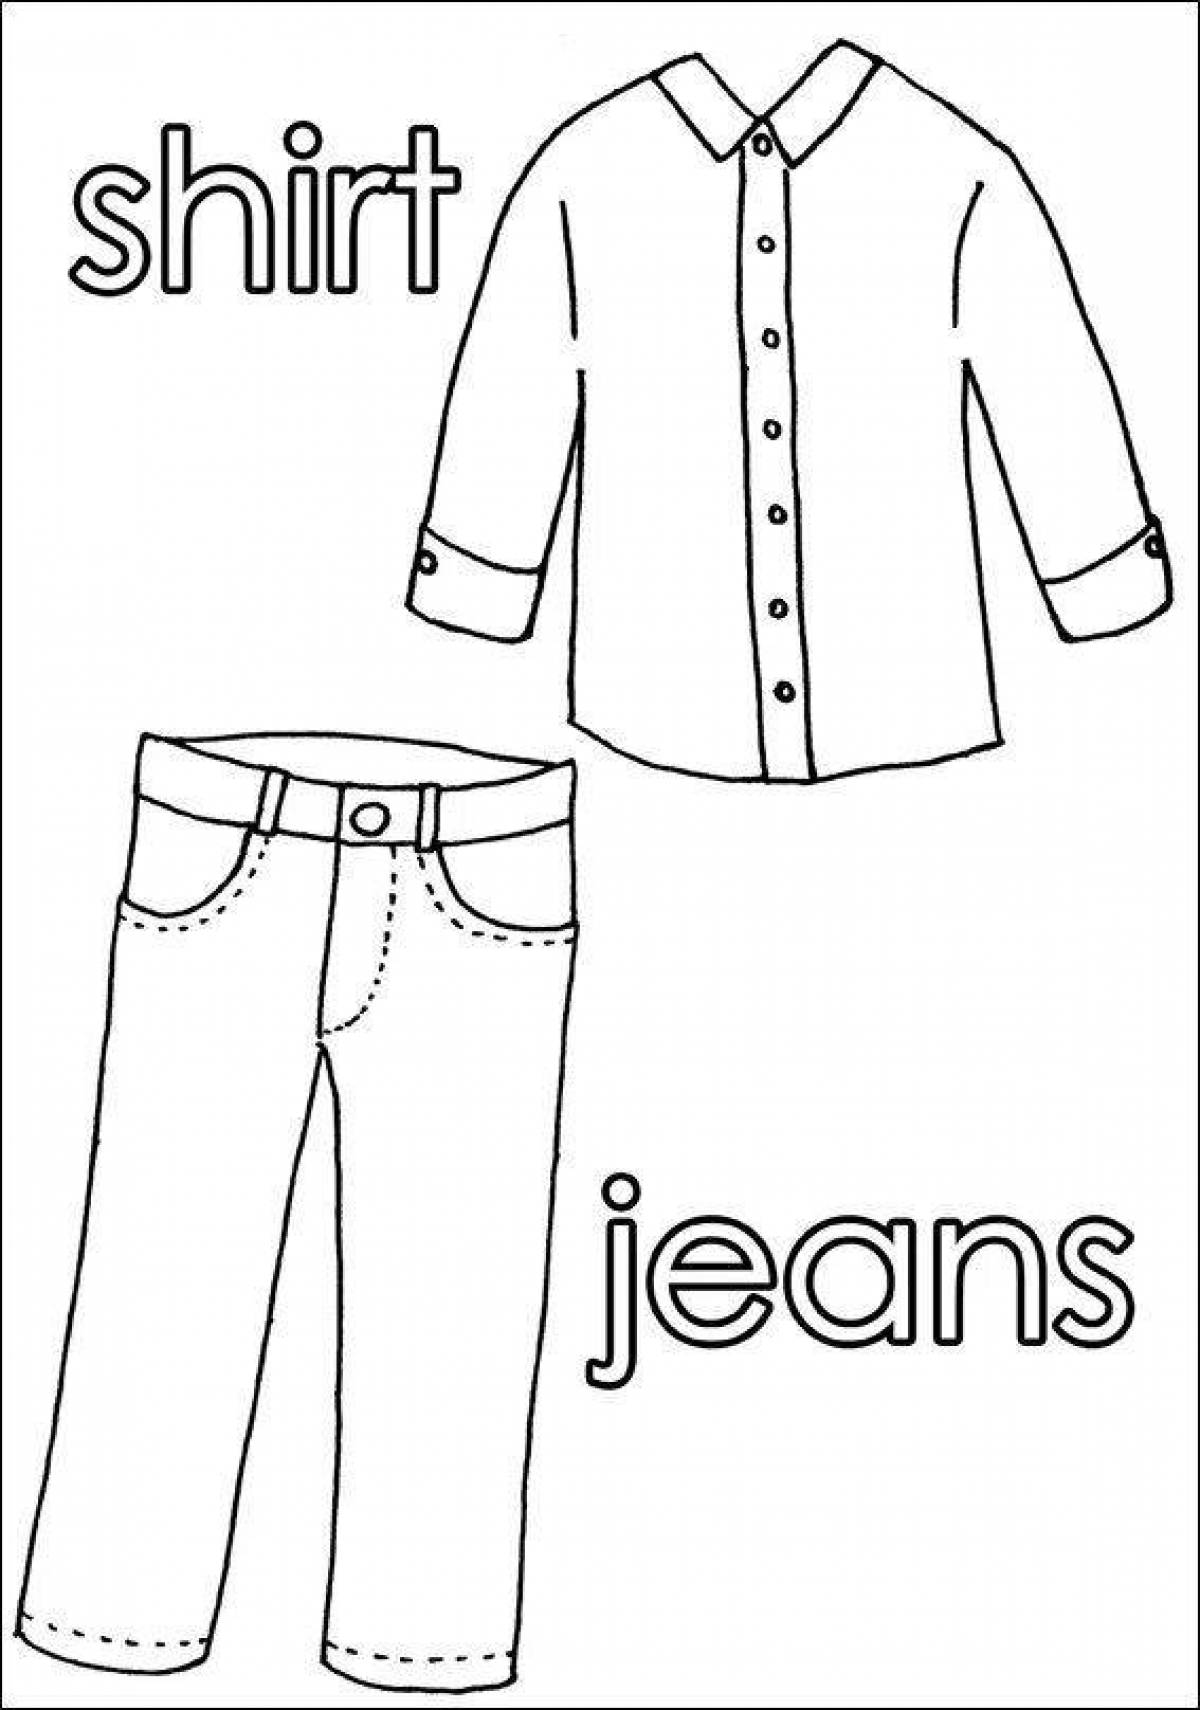 English for kids clothes #2